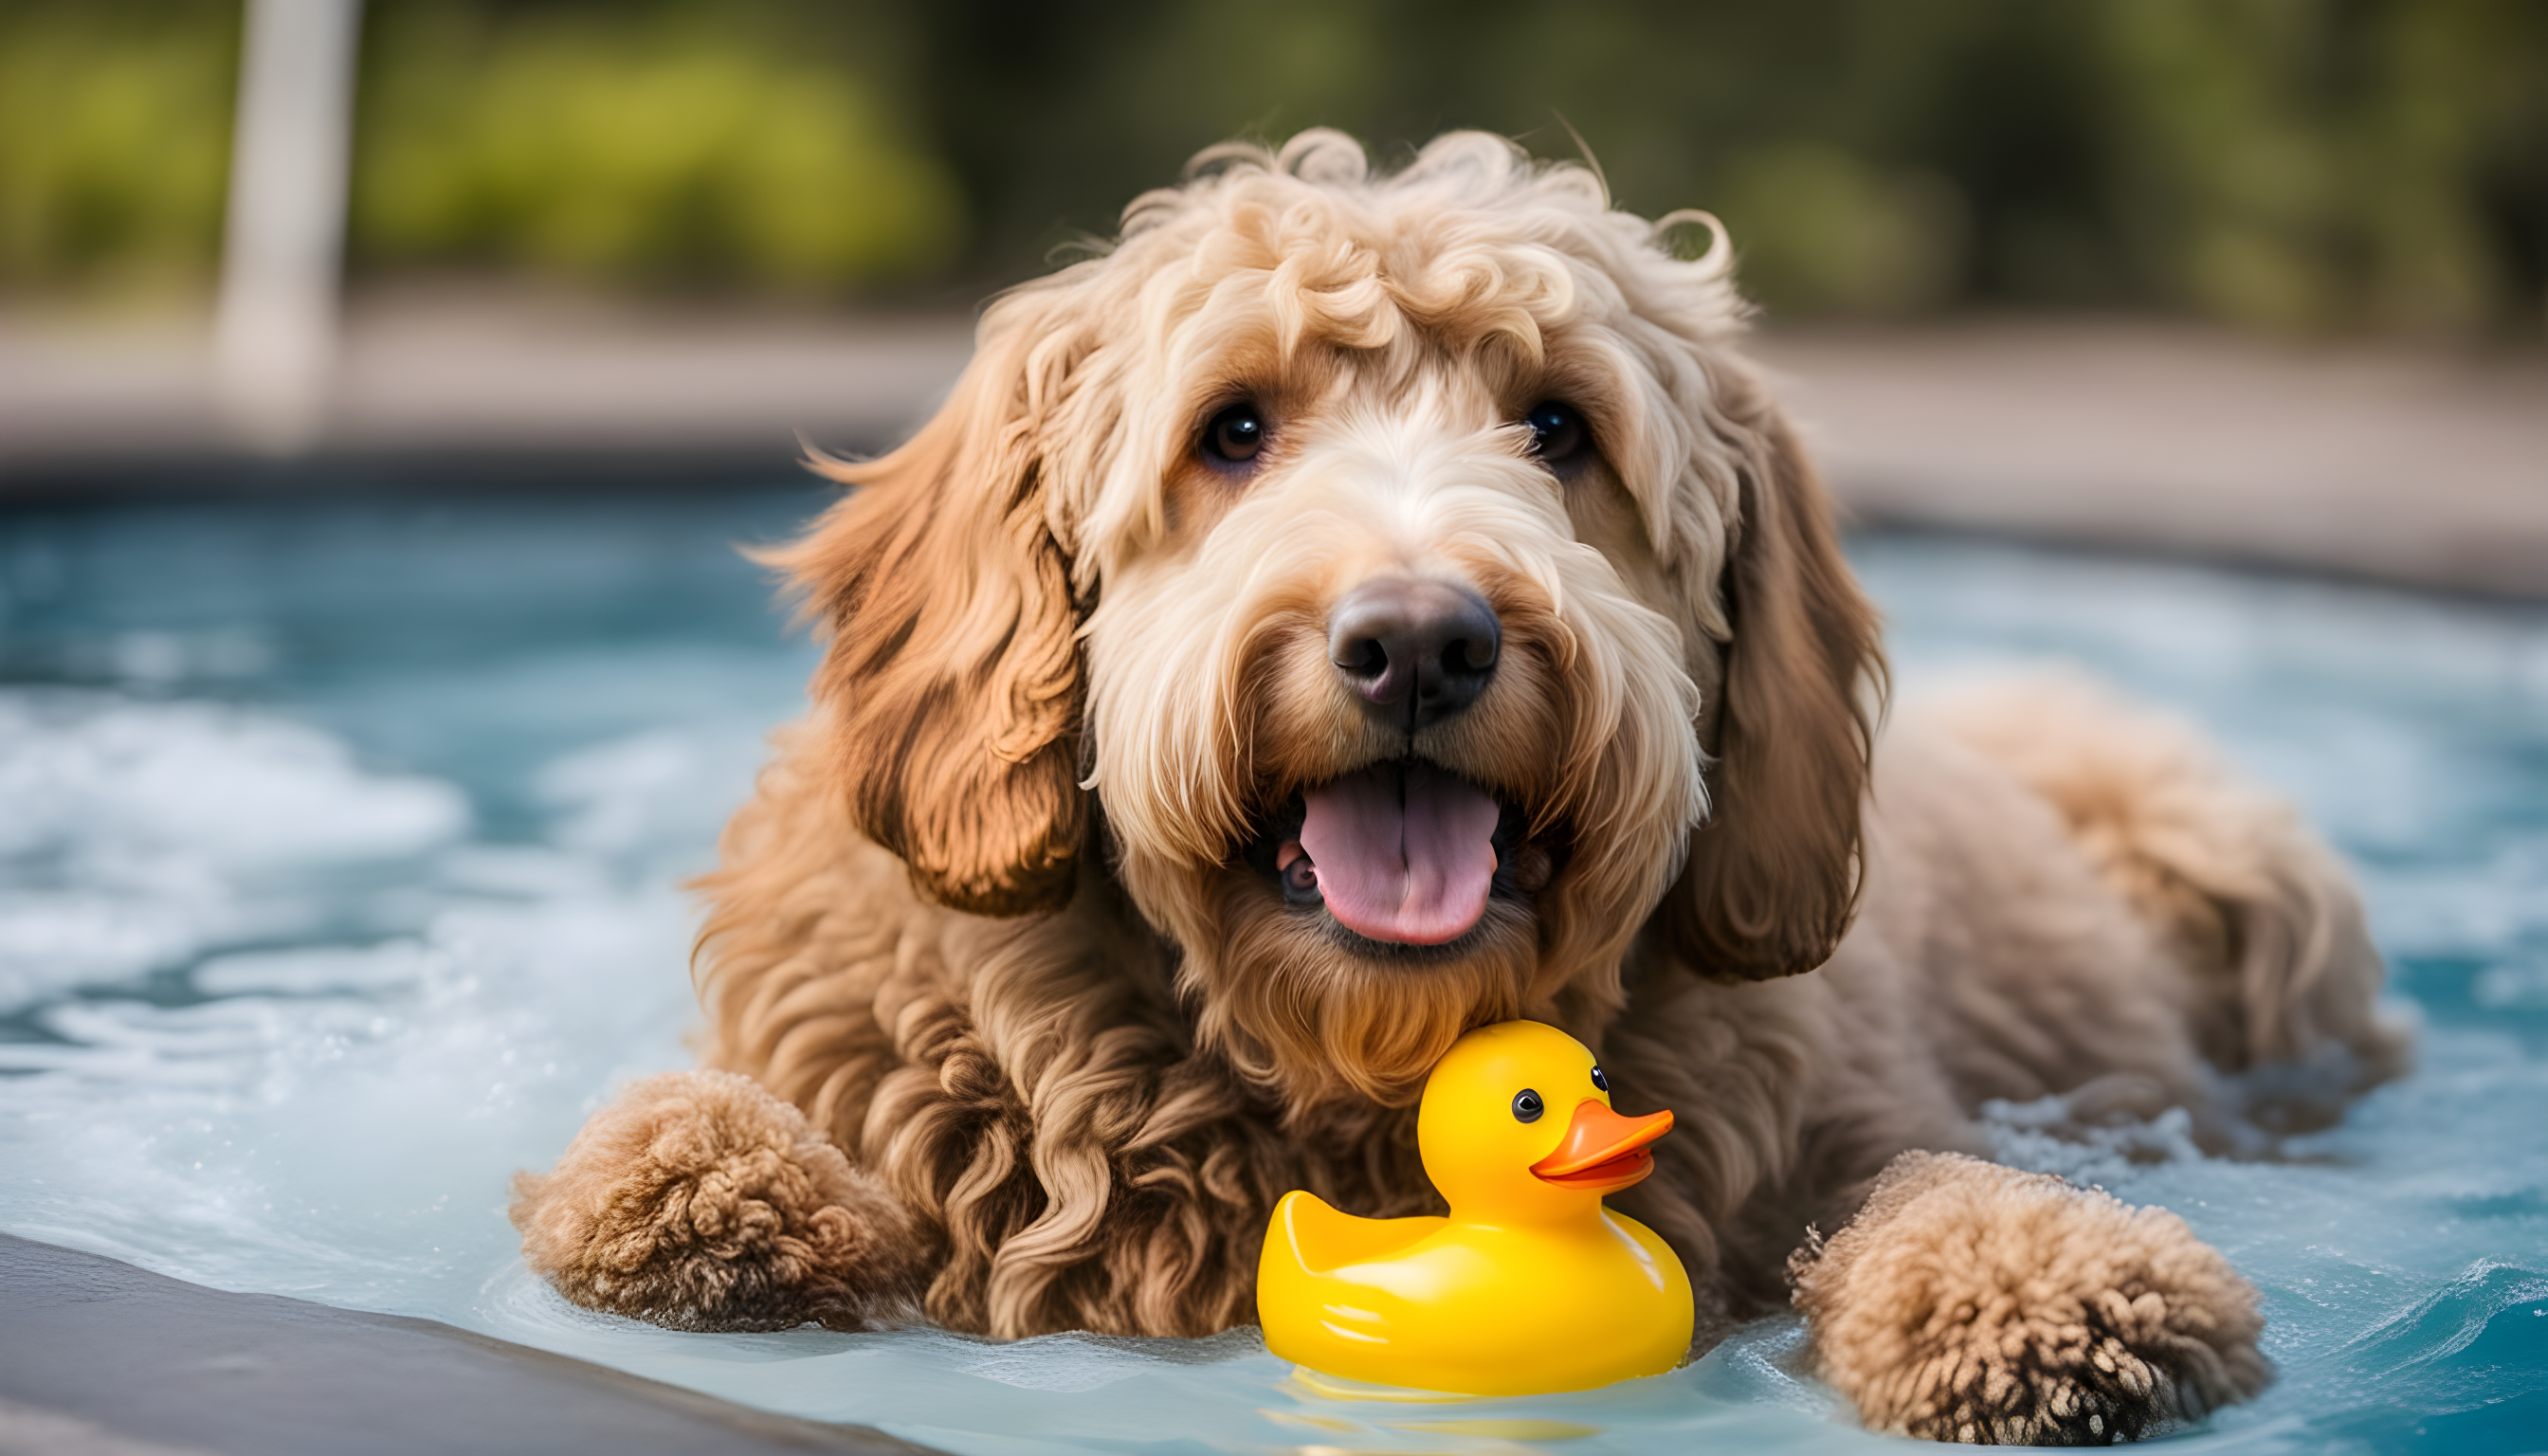 A happy Labradoodle getting the full spa treatment from its owner, complete with a rubber duckie